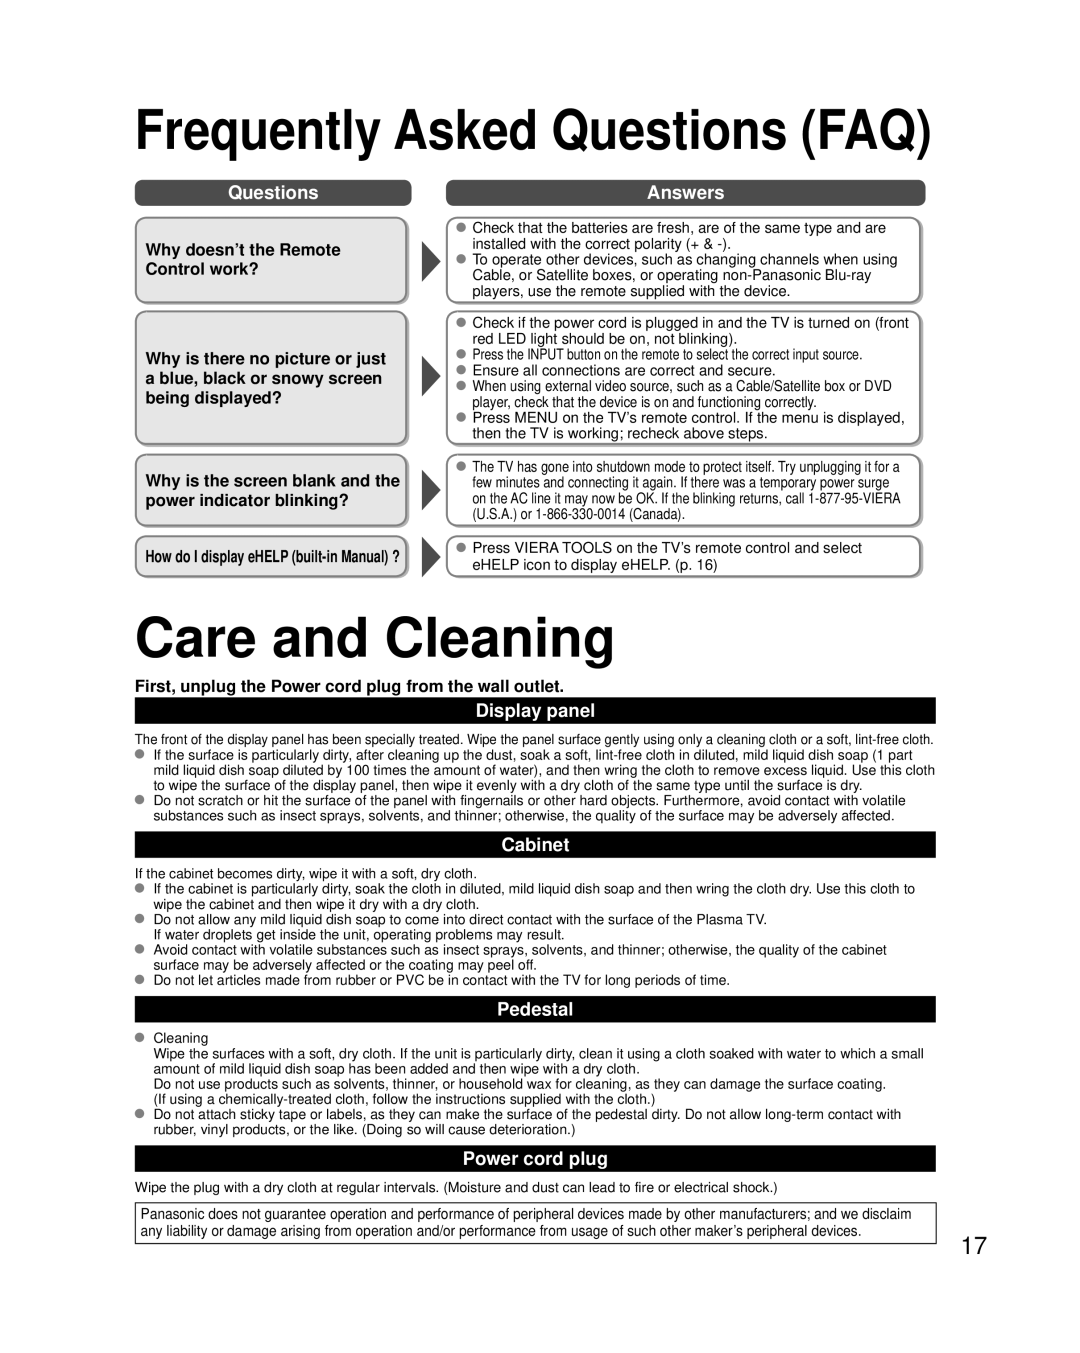 Panasonic TCP60UT50 Care and Cleaning, Frequently Asked Questions FAQ, Answers, Display panel, Cabinet, Pedestal 